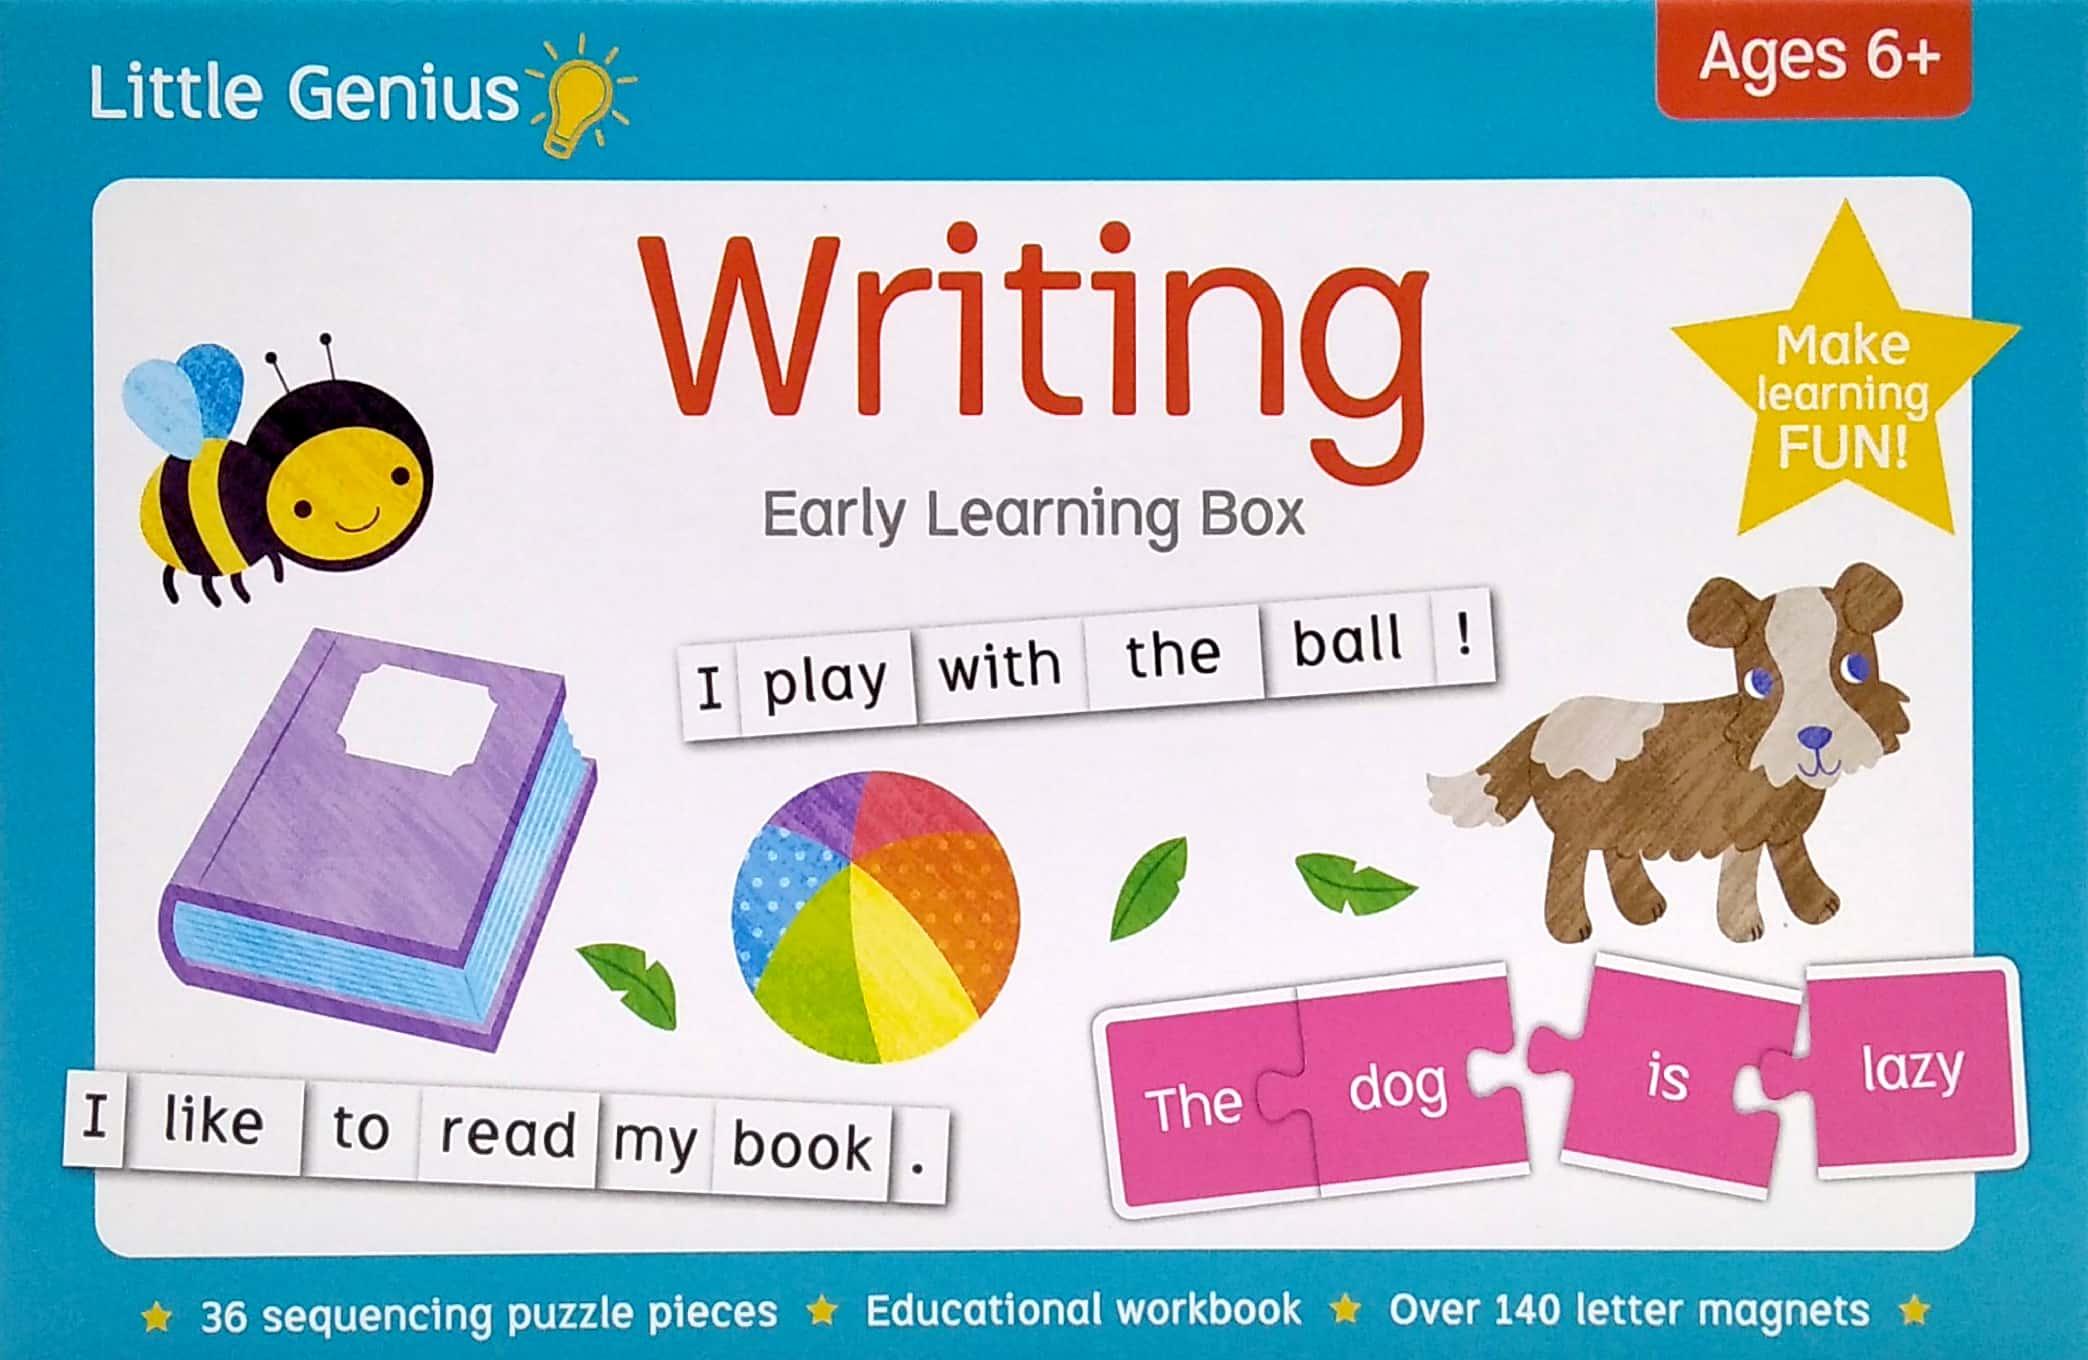 Little Genius: Writing Early Learning Box